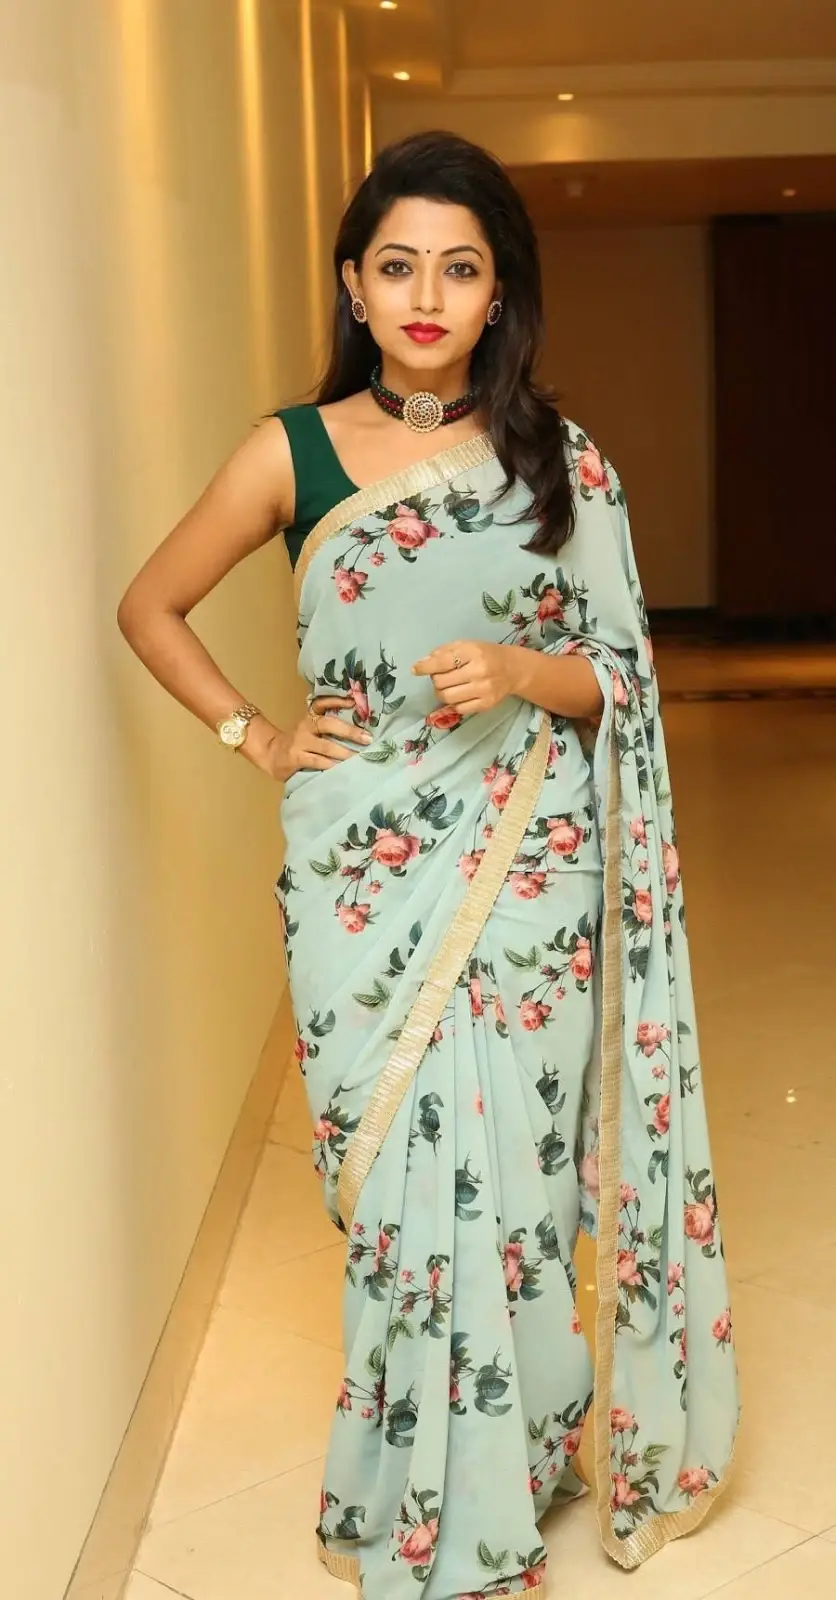 INDIAN TELEVISION ACTRESS NAVYA SWAMY IN BLUE SAREE 7